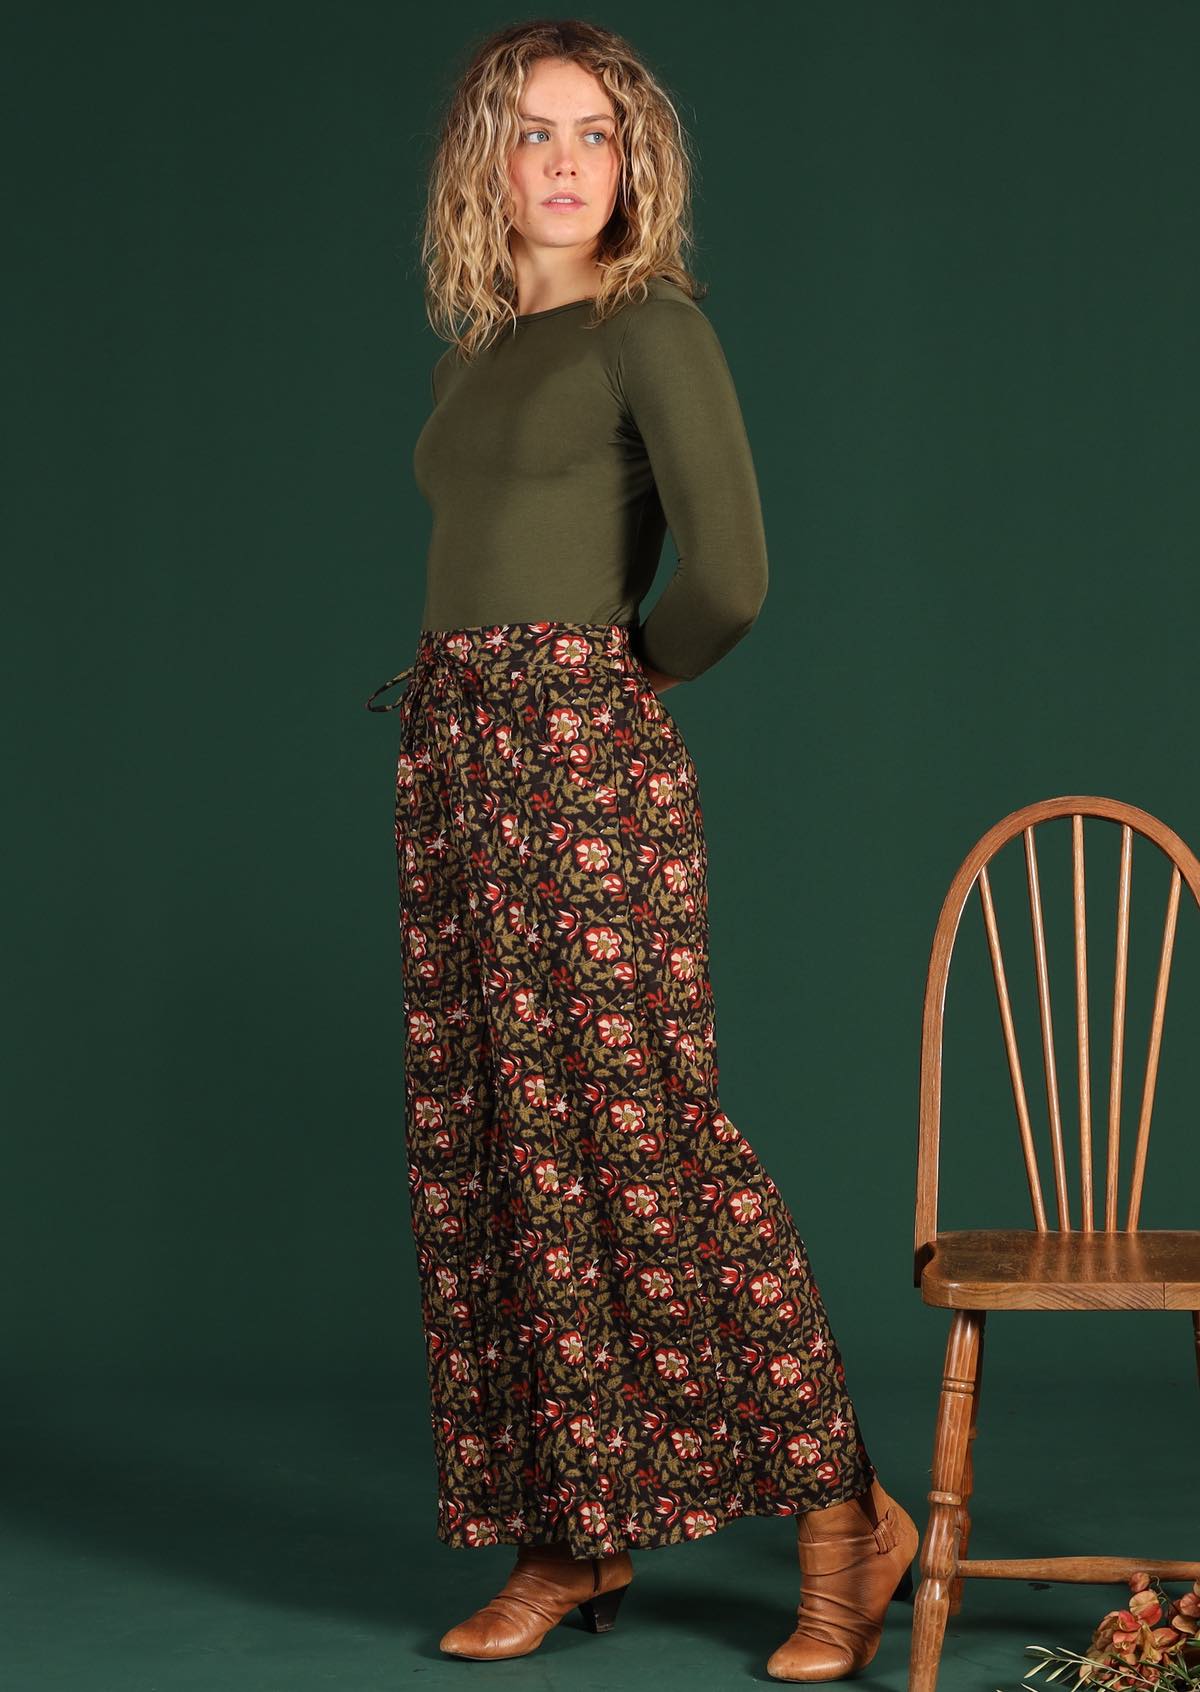 Model in Janis Pants Wild Rose wide legged cotton women's pant with pockets and long sleeve army green top